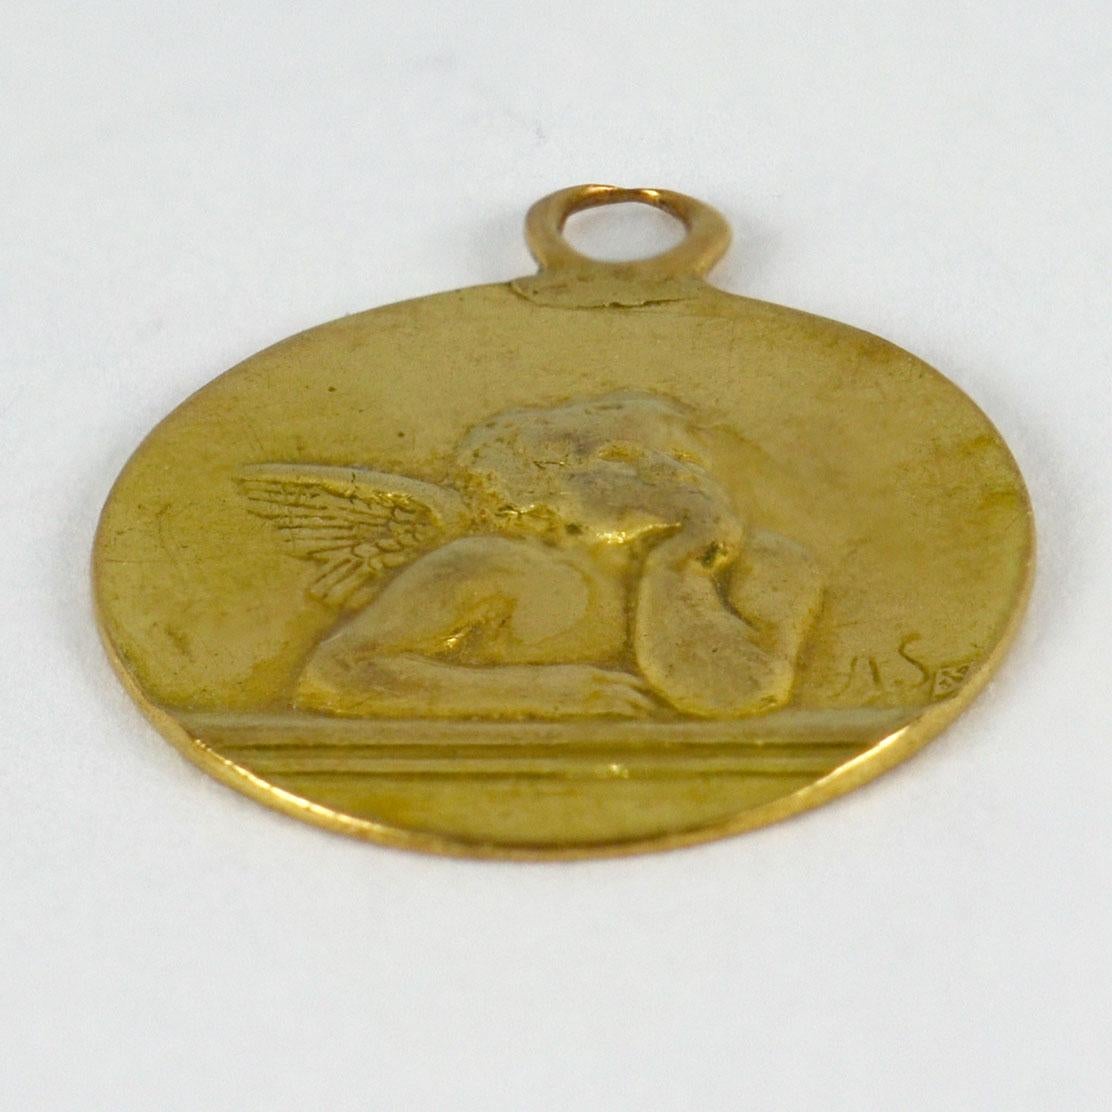 An 18 karat (18K) yellow gold charm pendant designed as a medal depicting Rafael’s cherub. Signed A.S., stamped with the eagle’s head for French manufacture and 18 karat gold, with unknown maker’s mark.

Dimensions: 2 x 1.7 x 0.13 cm (not including